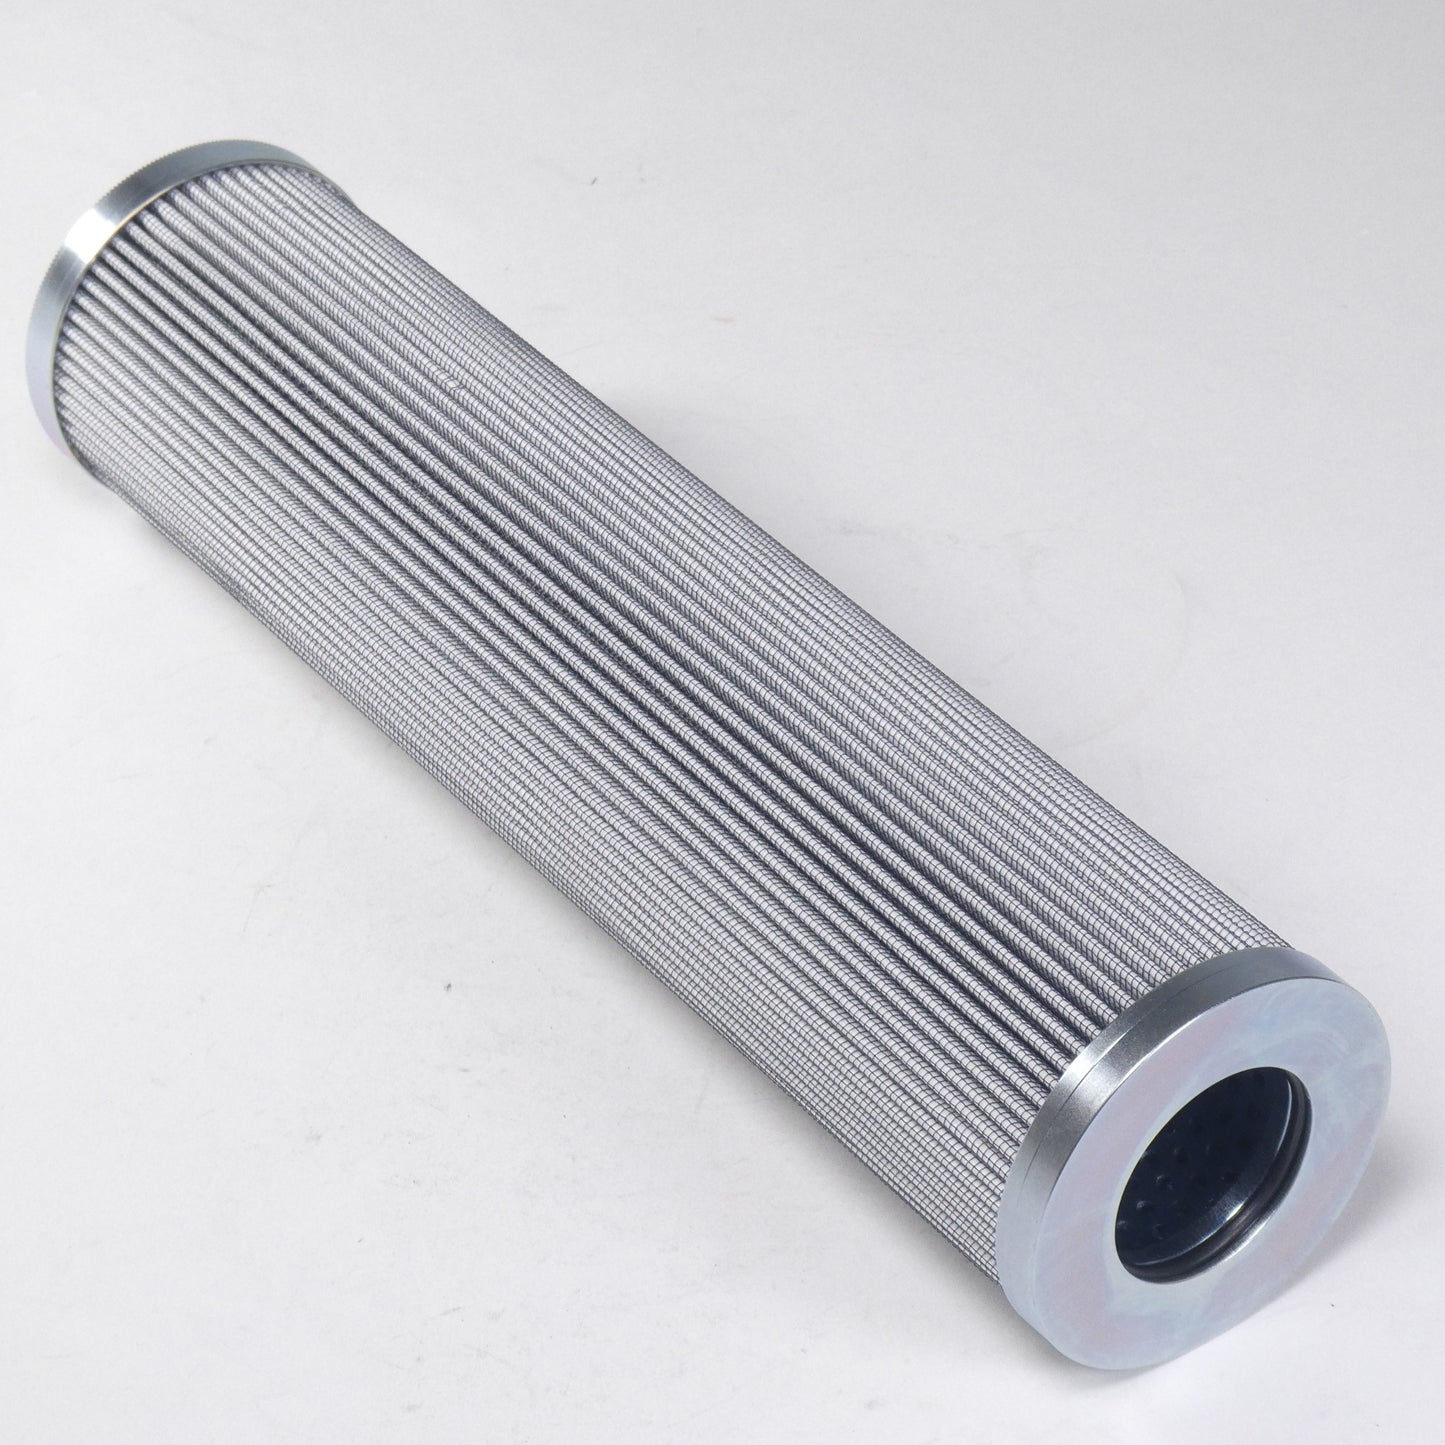 Hydrafil Replacement Filter Element for Hydac 1.11.13D17BH/-V